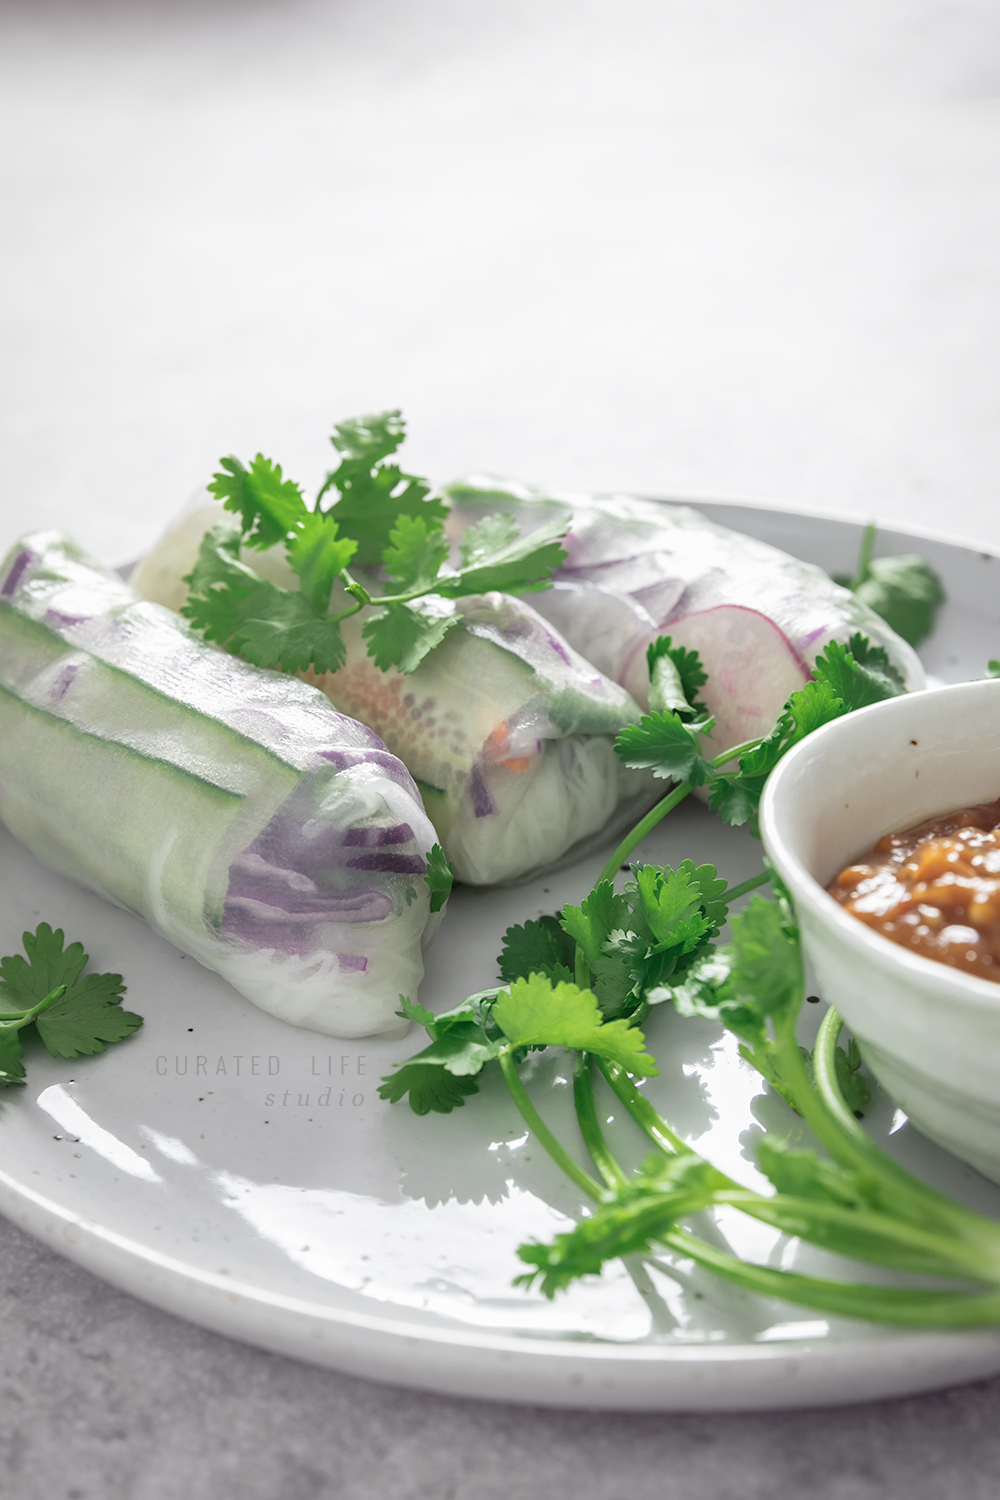 A macro view of Fresh Spring Rolls and coriander as if you were holding the plate to your eyes. 

#Vietnamese #Healthy #Peanut #Dipping #Sauce #Vegetarian #Vegan #Gluten-free #Tofu #Recipe #Rice #Paper #Spring #Rolls #Fresh